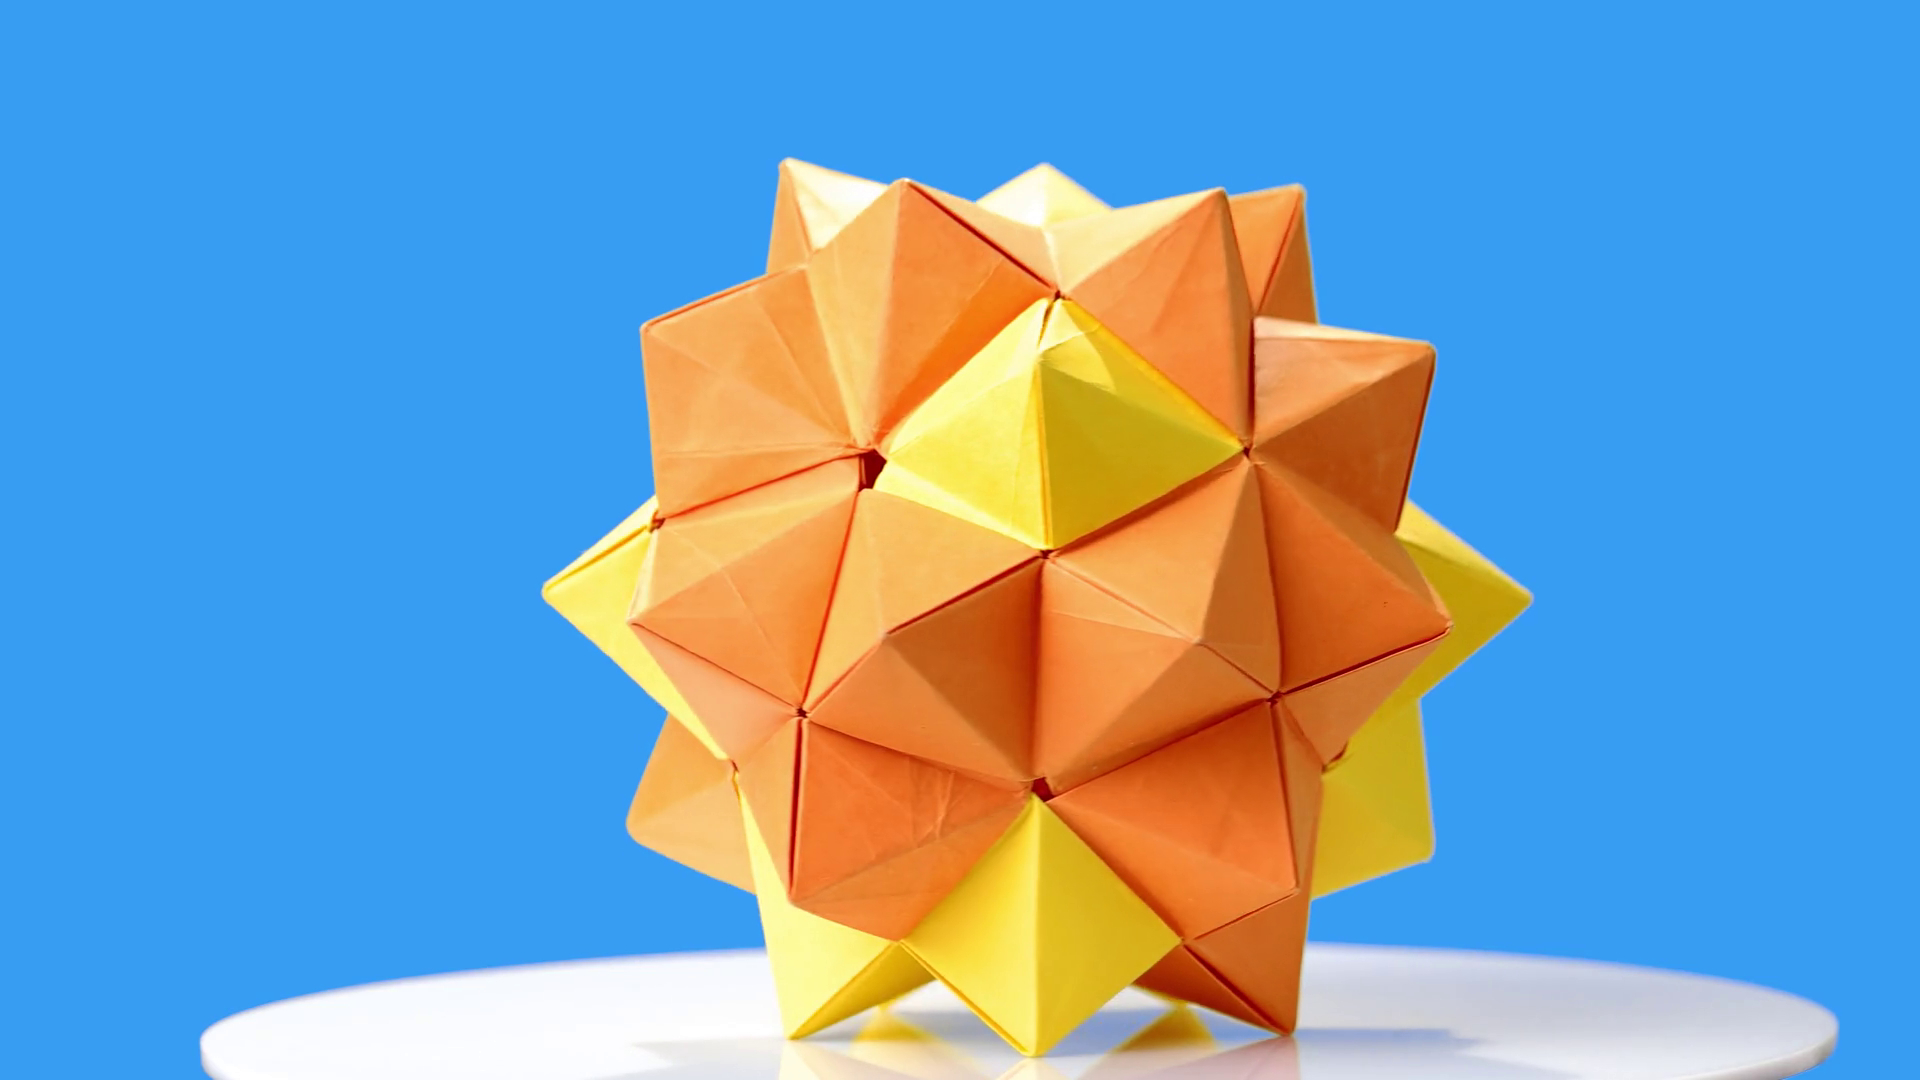 Origami Modular Ball Yellow Origami Flower On Blue Background Modular Origami Ball Paper Crafting Concept